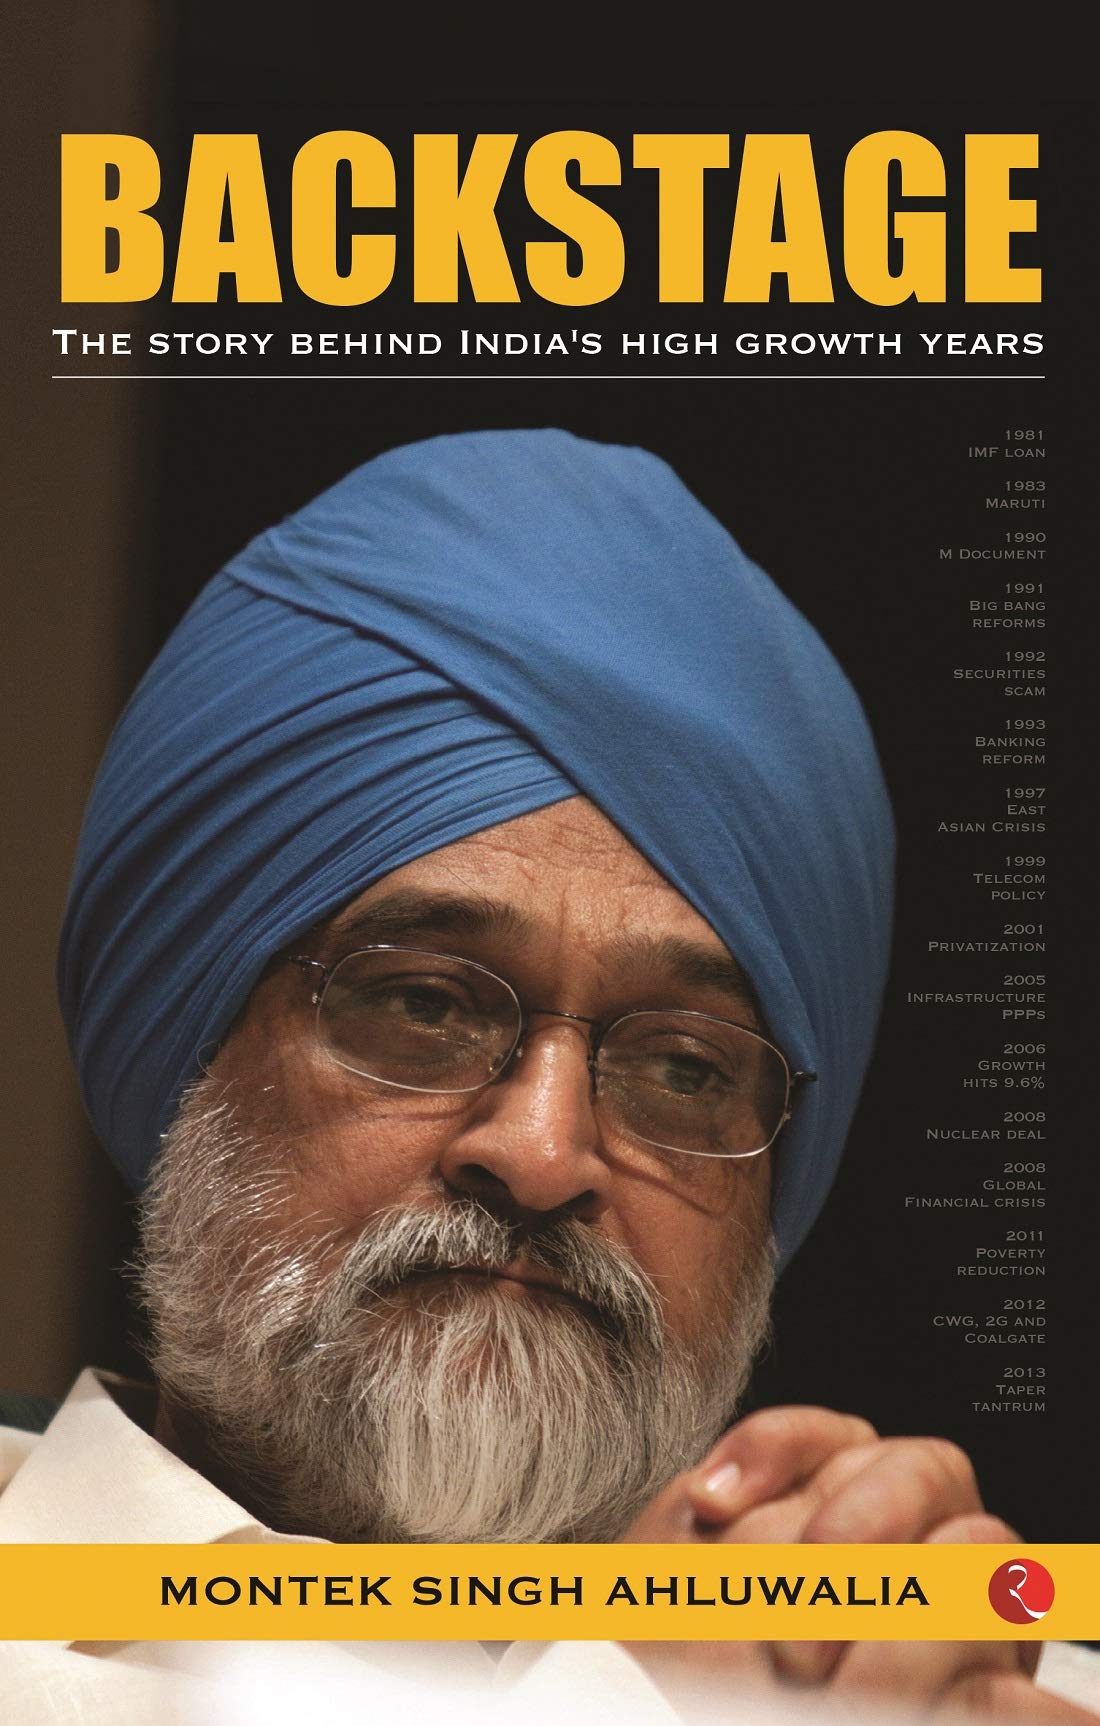 BACKSTAGE THE STORY BEHIND INDIA'S HIGH GROWTH YEARS